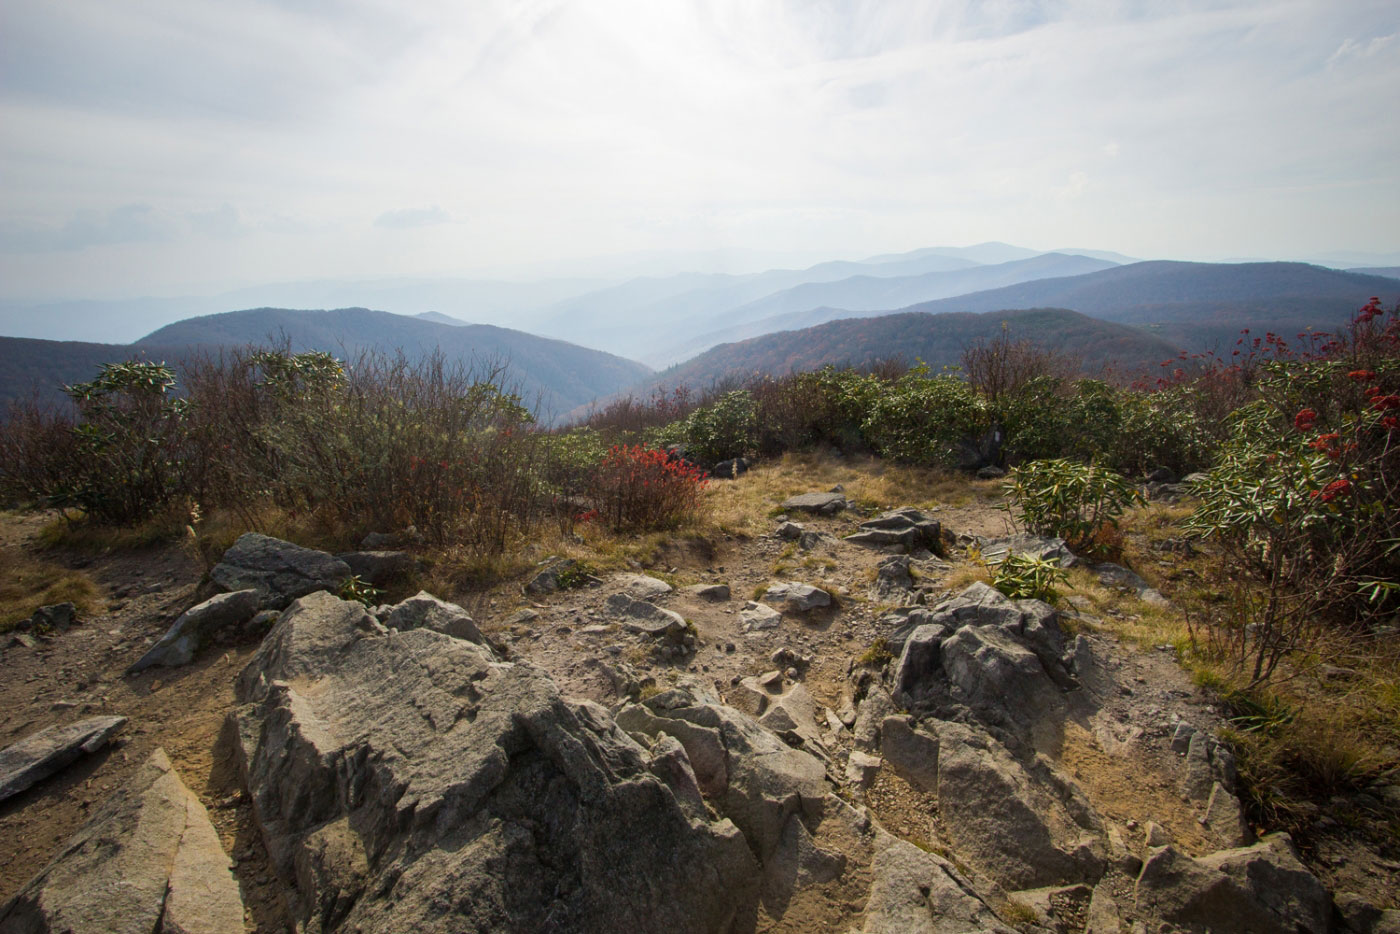 Hike Thunderhead Mountain via Russell Field Loop in Great Smoky Mountains National Park, Tennessee - Stav is Lost